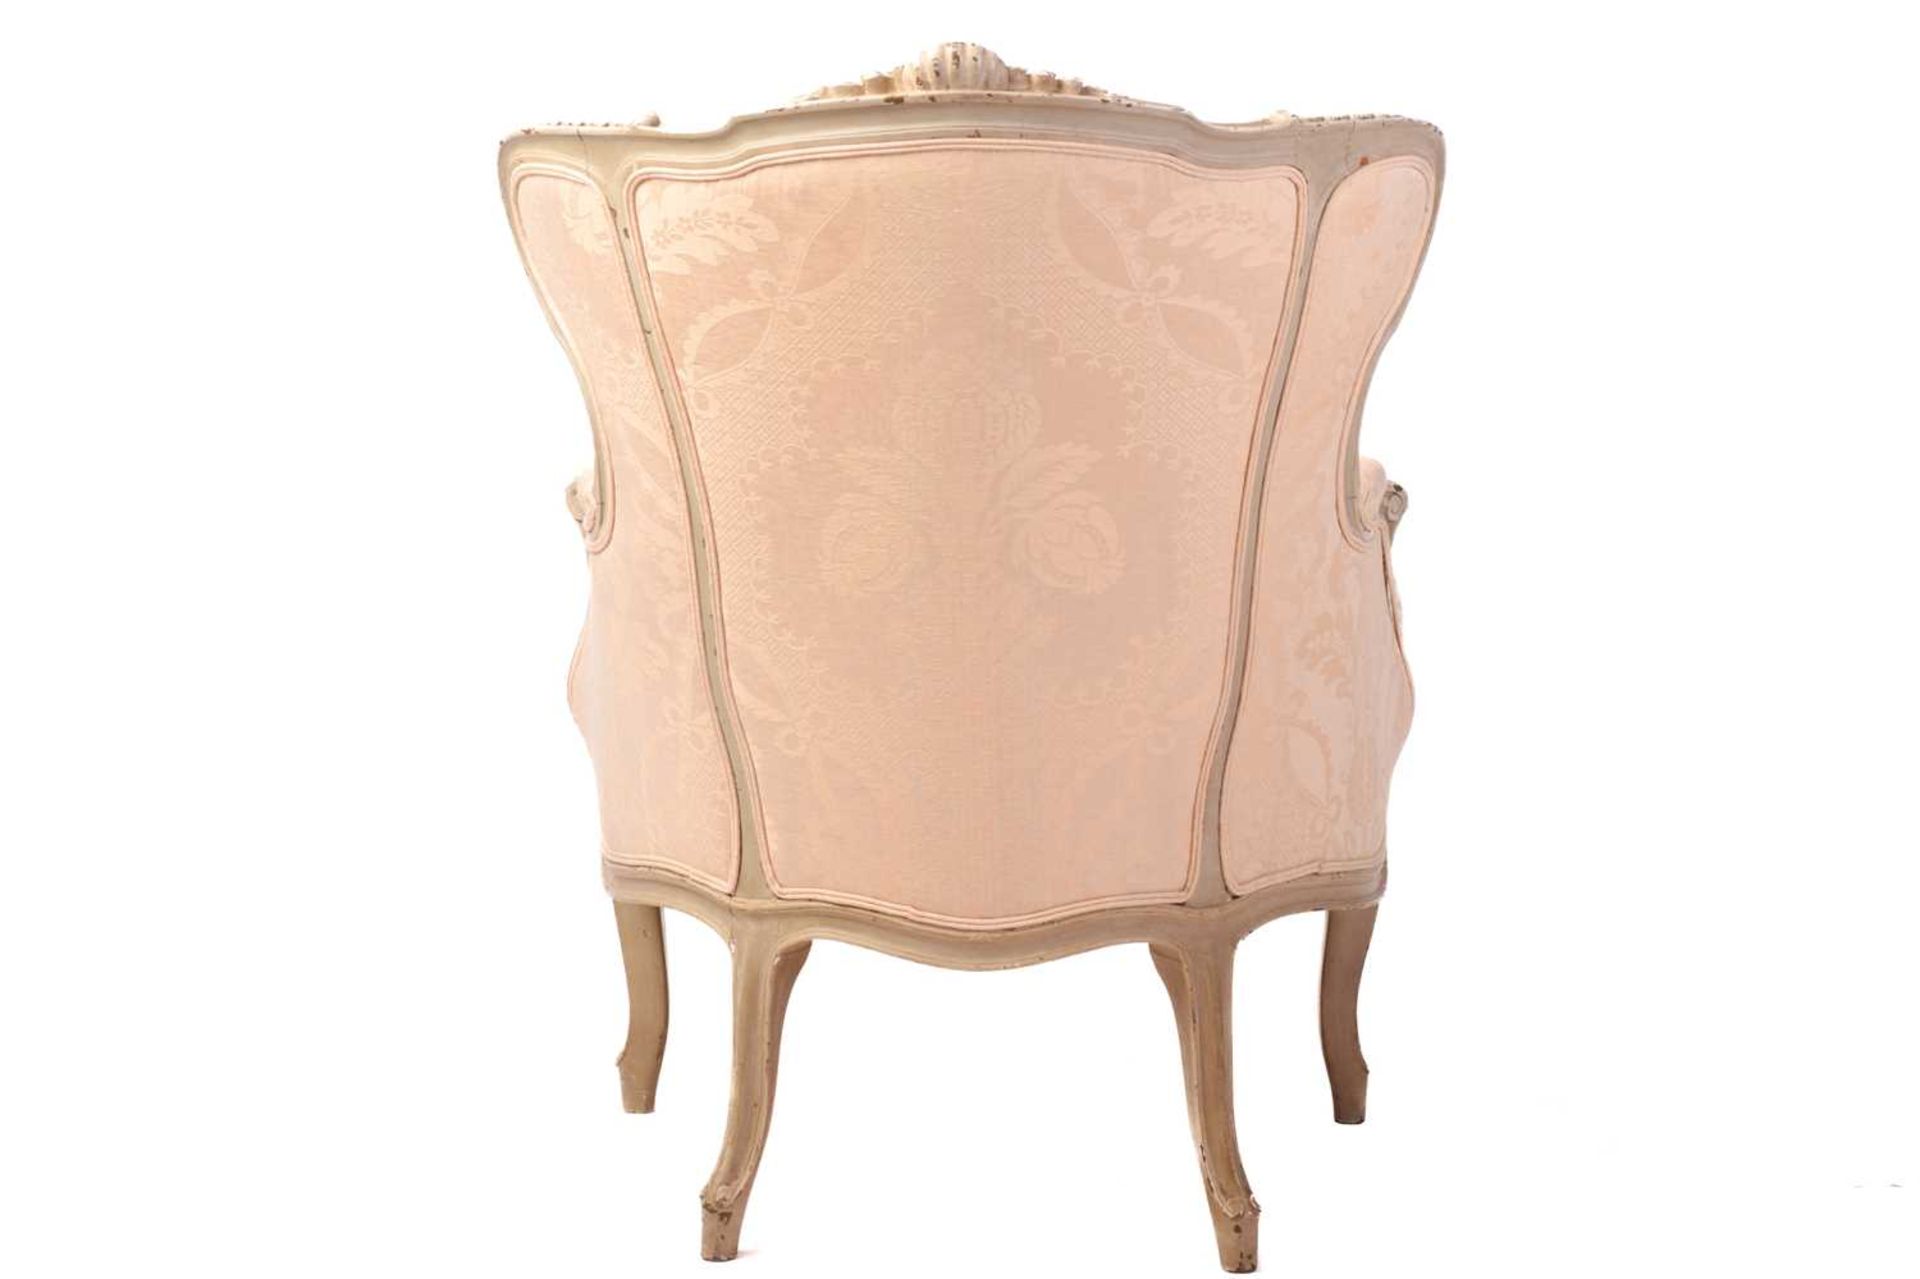 A French Louis XV-style dove grey painted bergere armchair with wing back and carved shell - Image 6 of 8